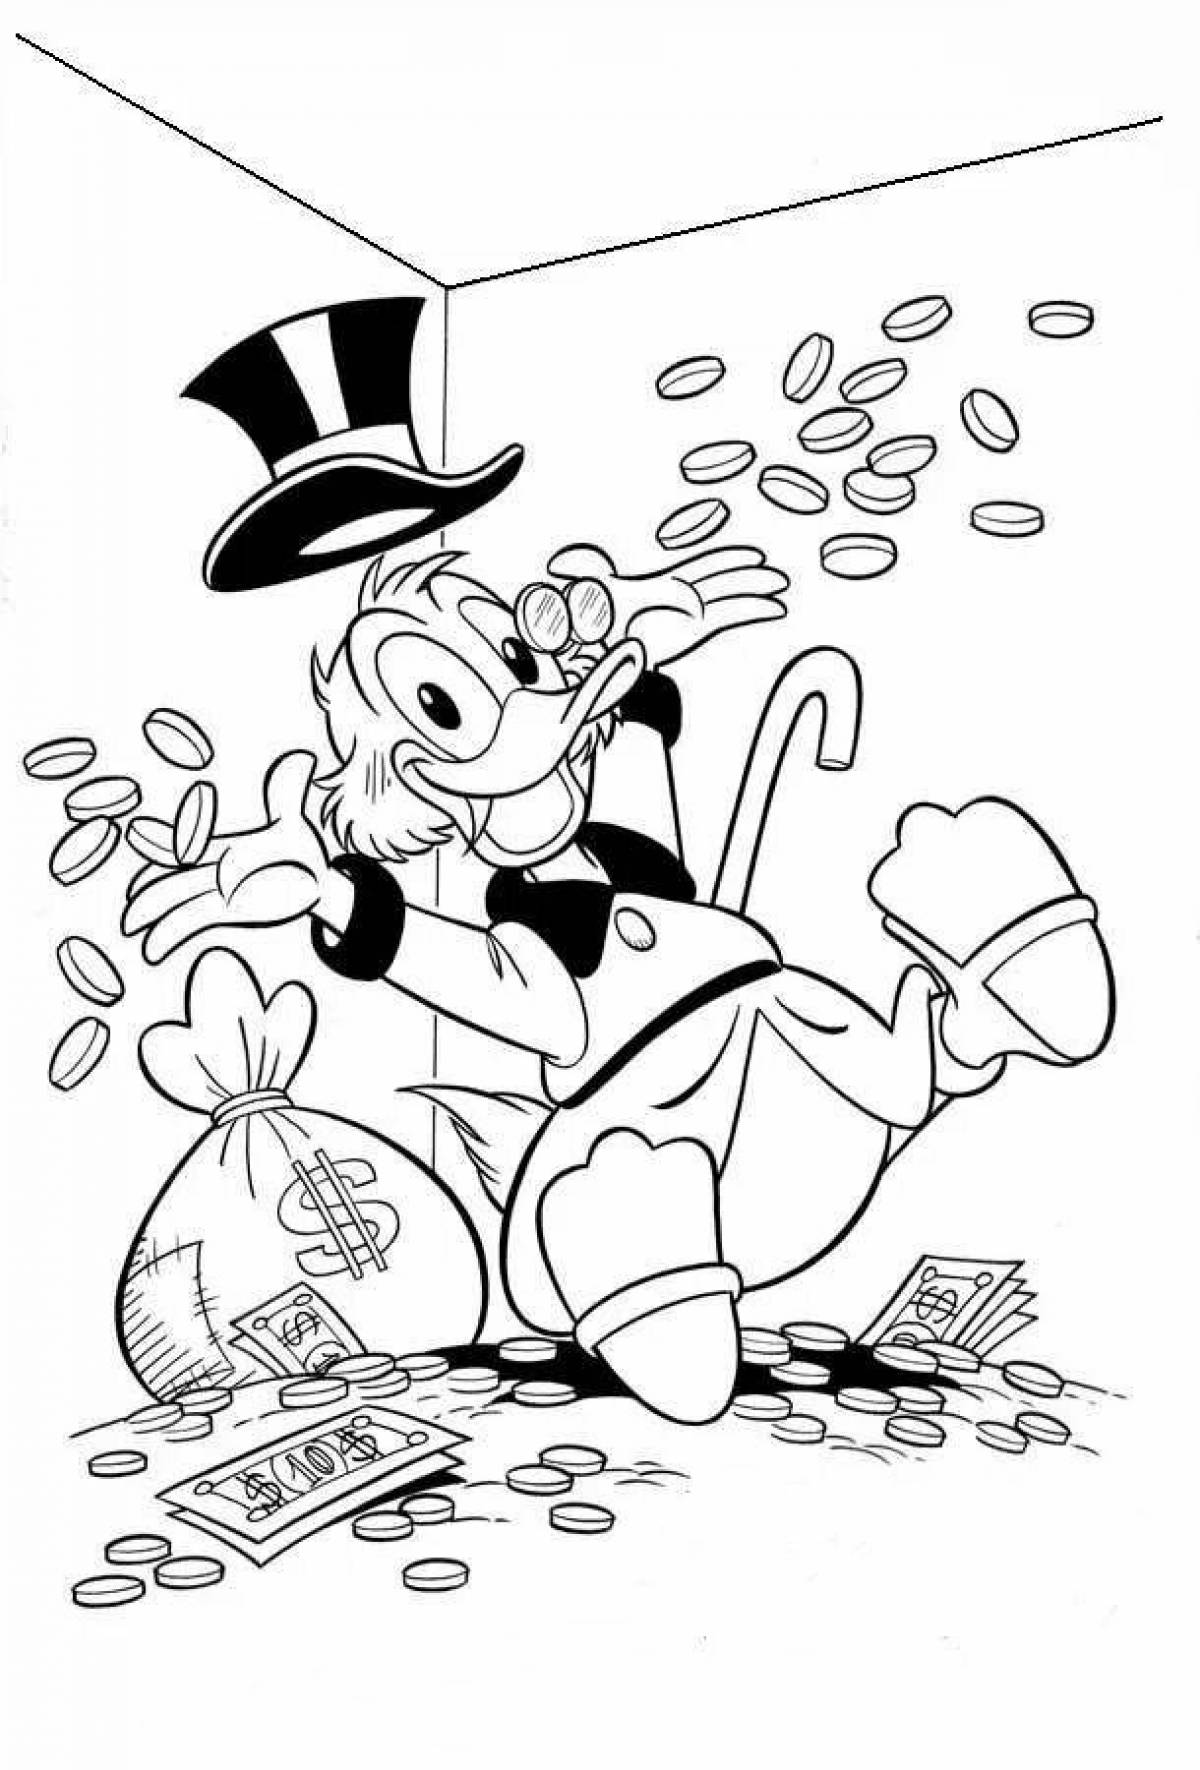 Scrooge's vibrant coloring page